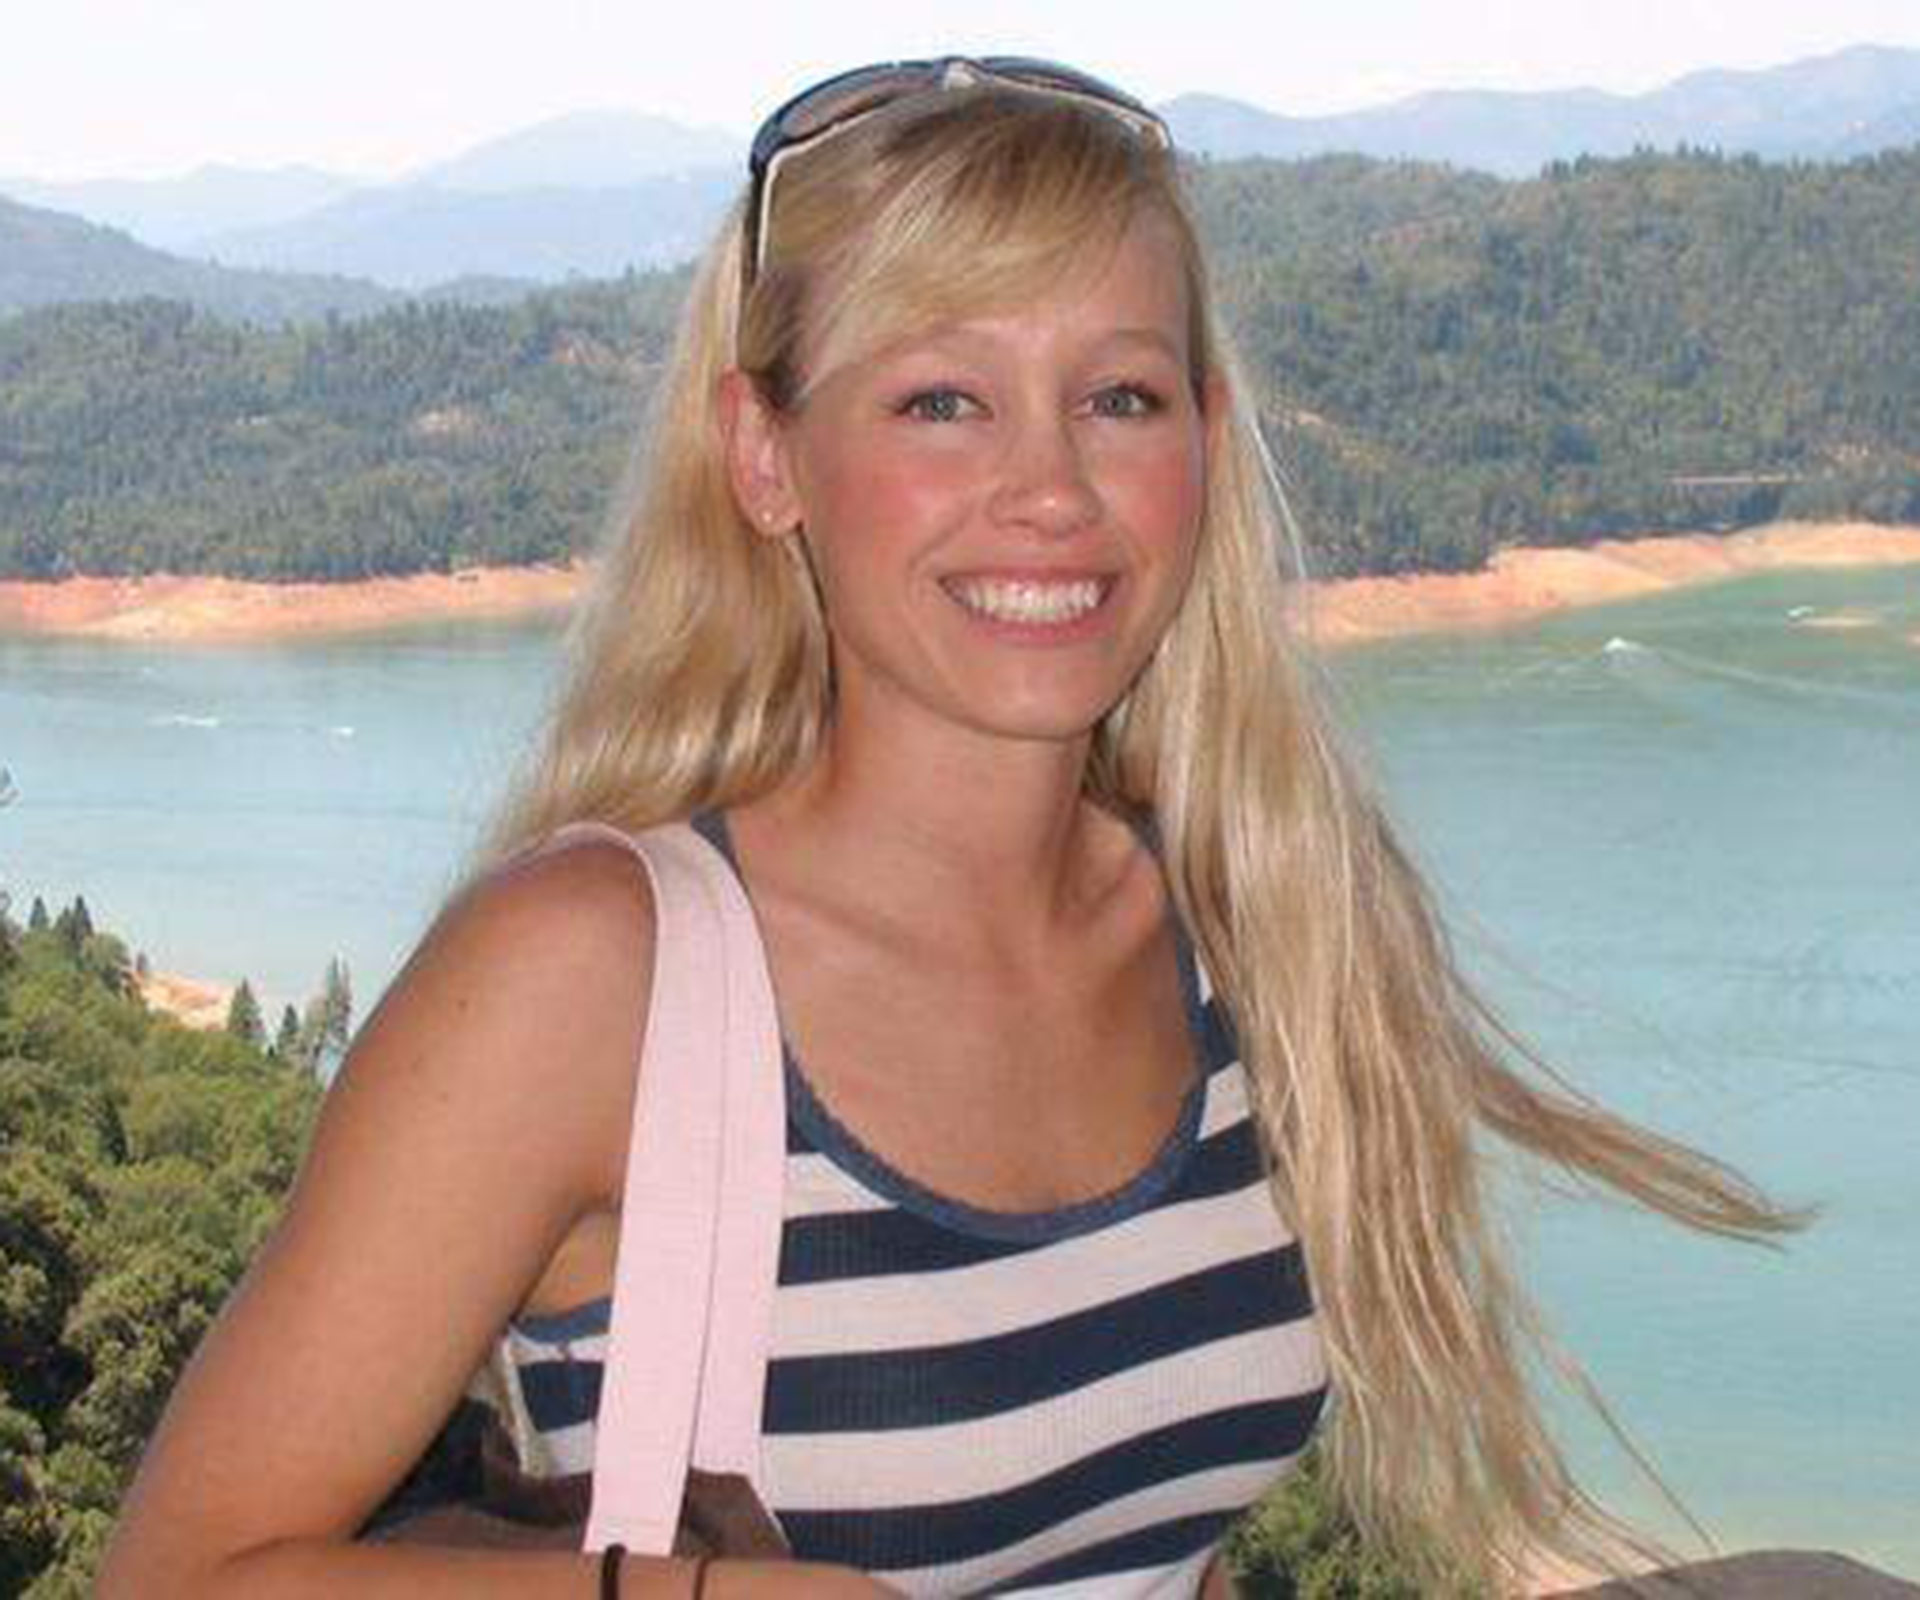 Sherri Papini starved, burned and head shaved: More details emerge about the abducted mum